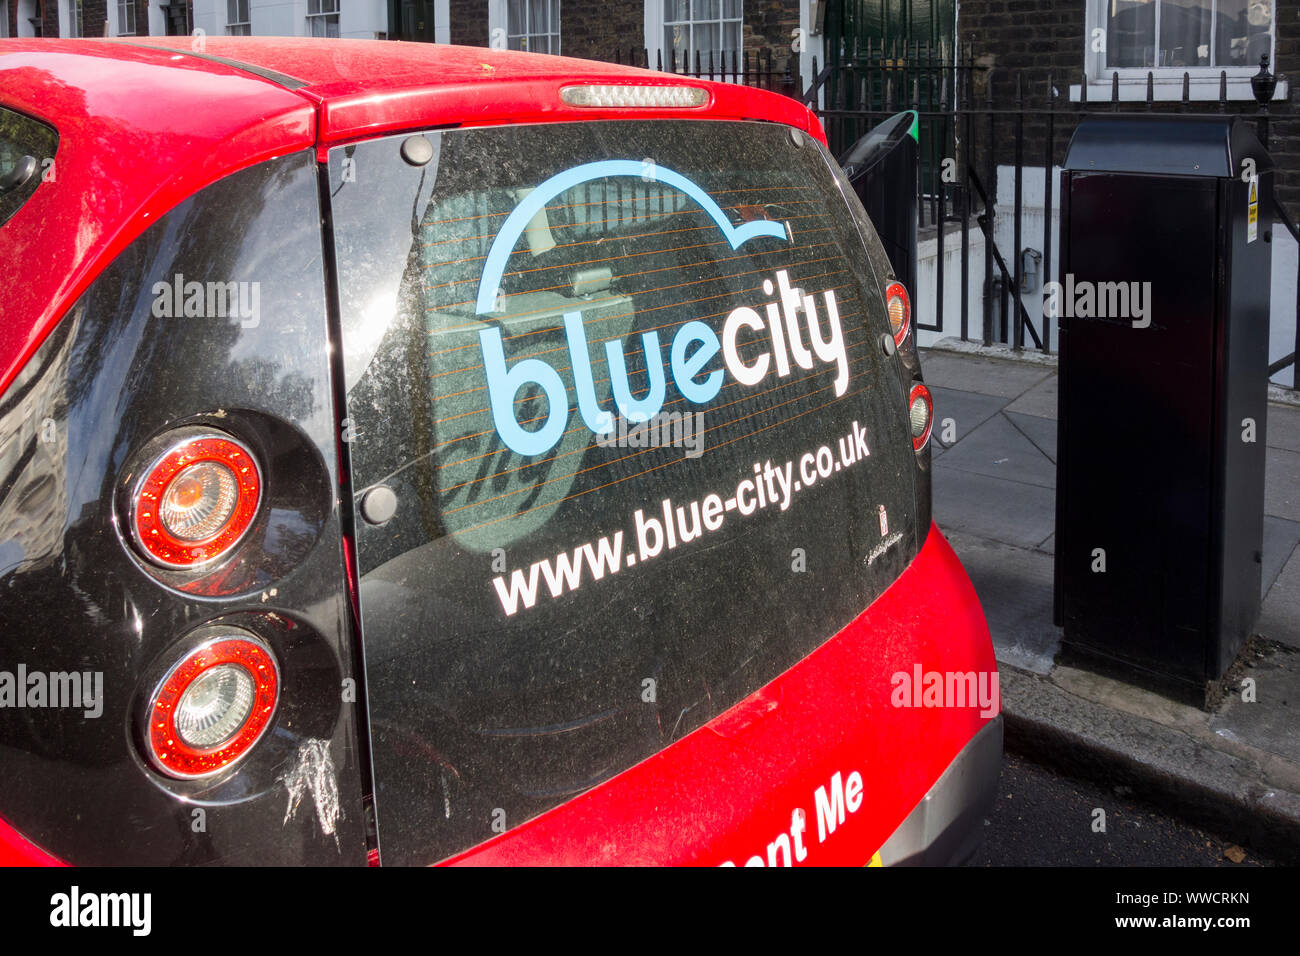 Bluecity High Resolution Stock Photography and Images - Alamy